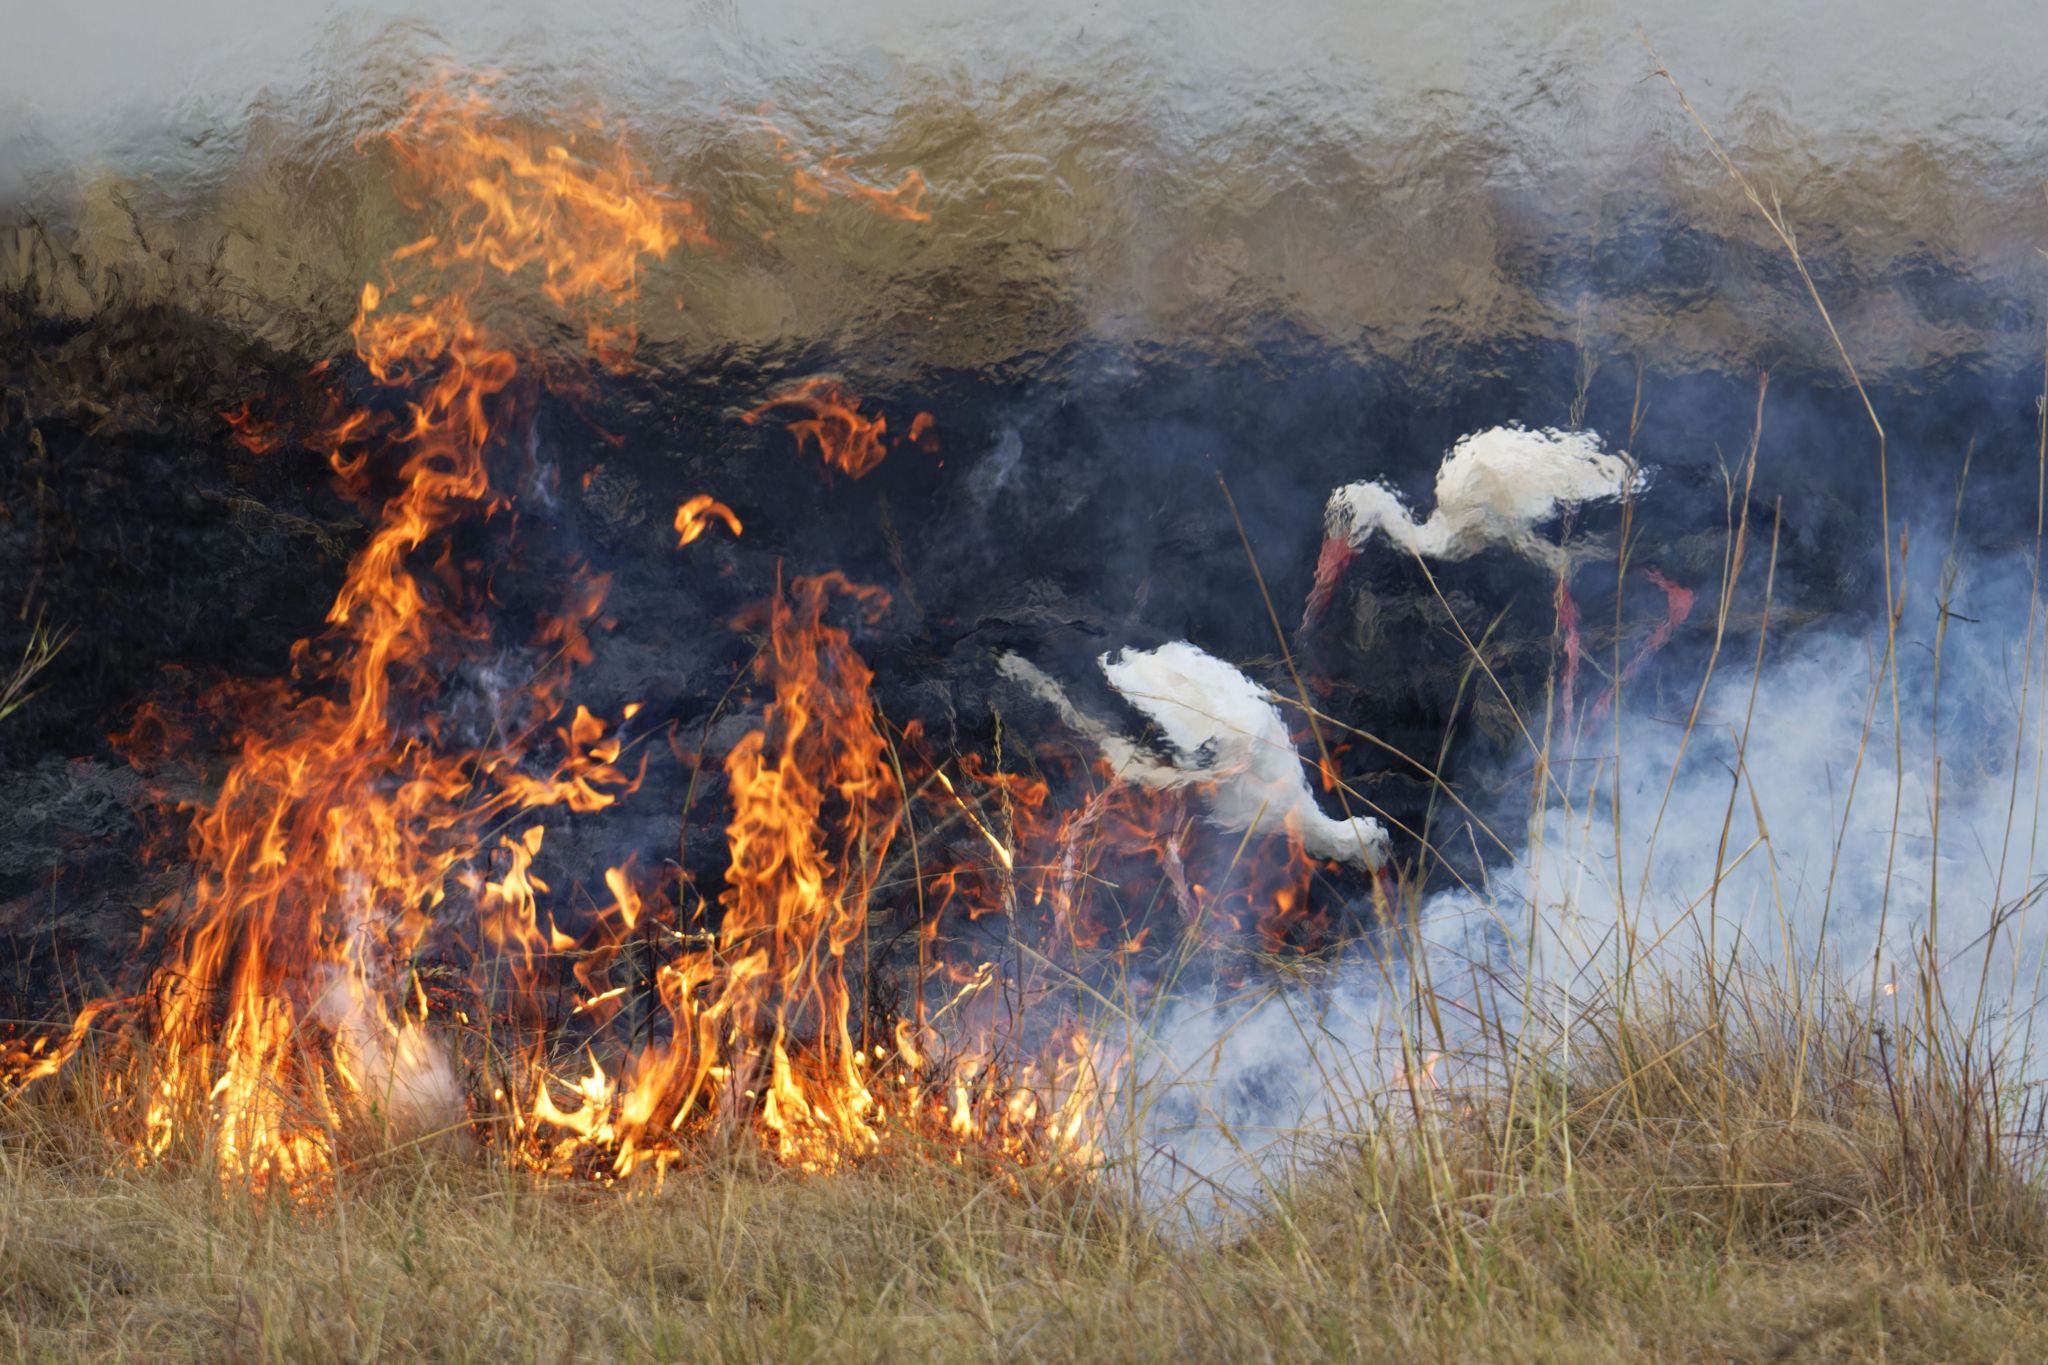 A pair of white storks in shimmering heat against the burnt ground